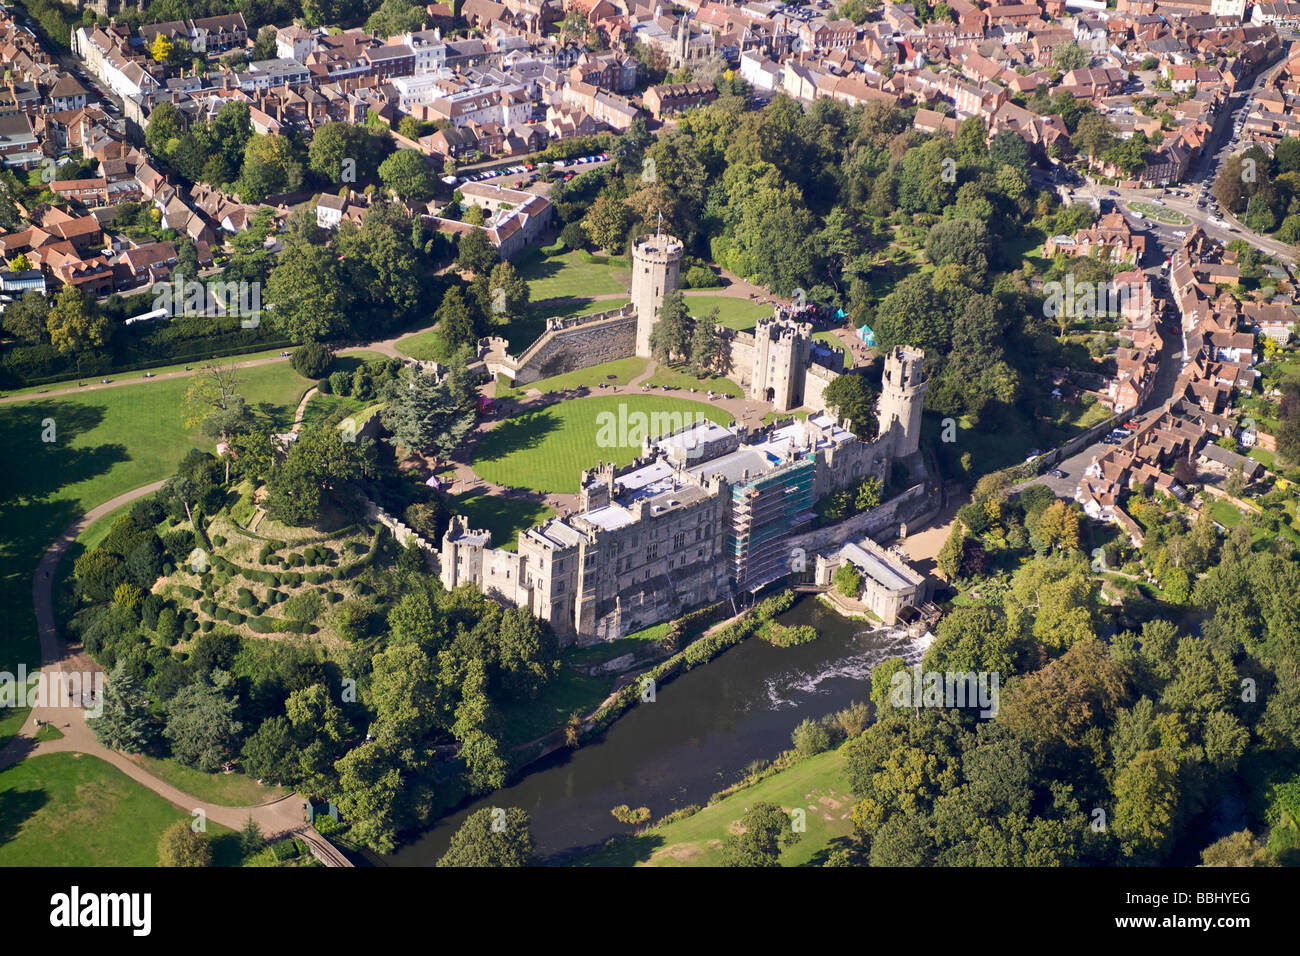 Aerial view of Warwick Castle built by William the Conqueror in 1068 Stock Photo